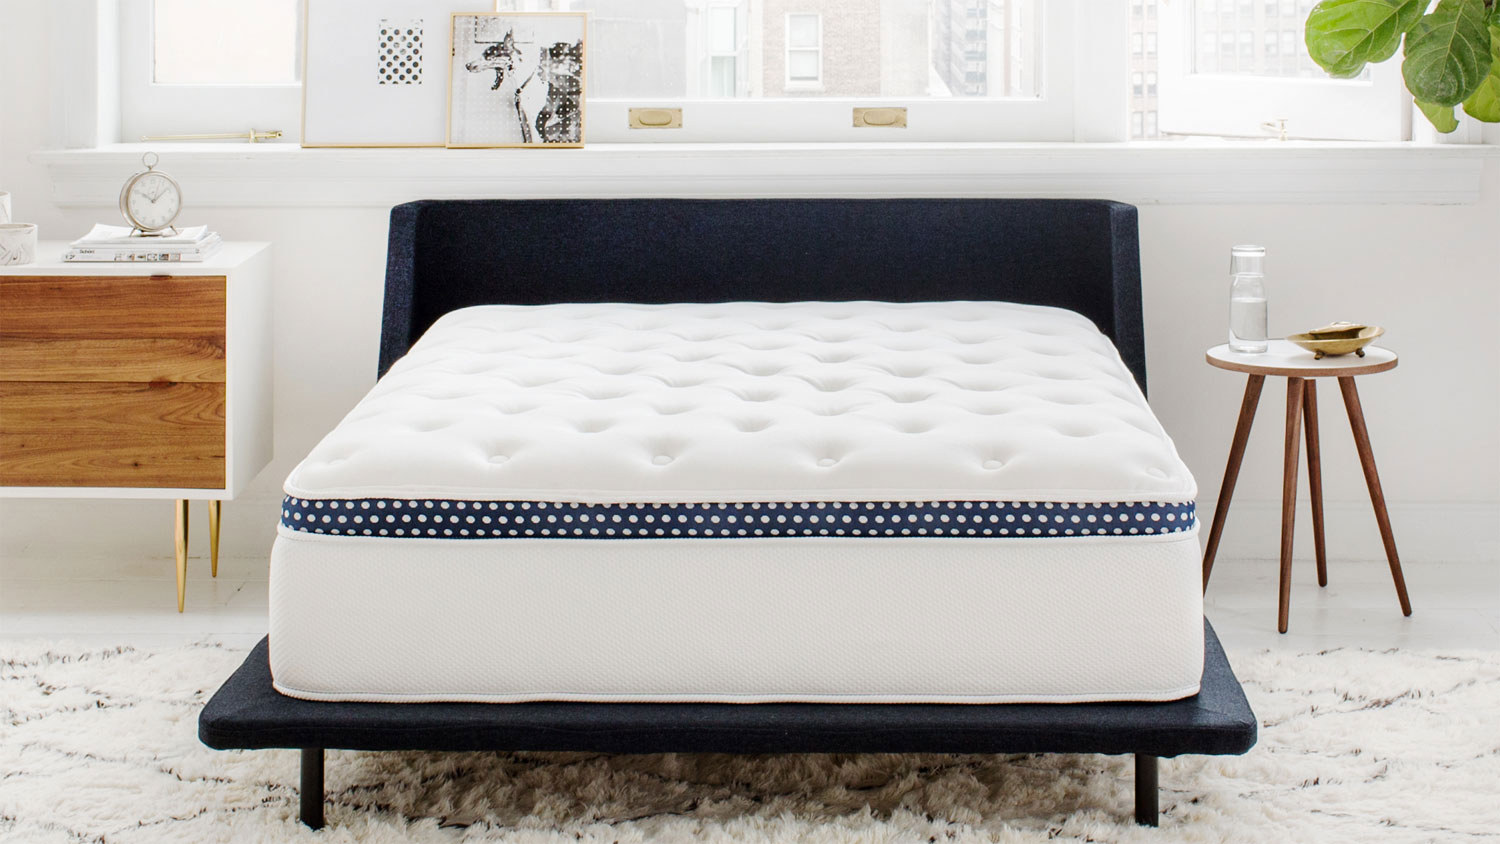 WinkBed PLUS mattress in a white bedroom